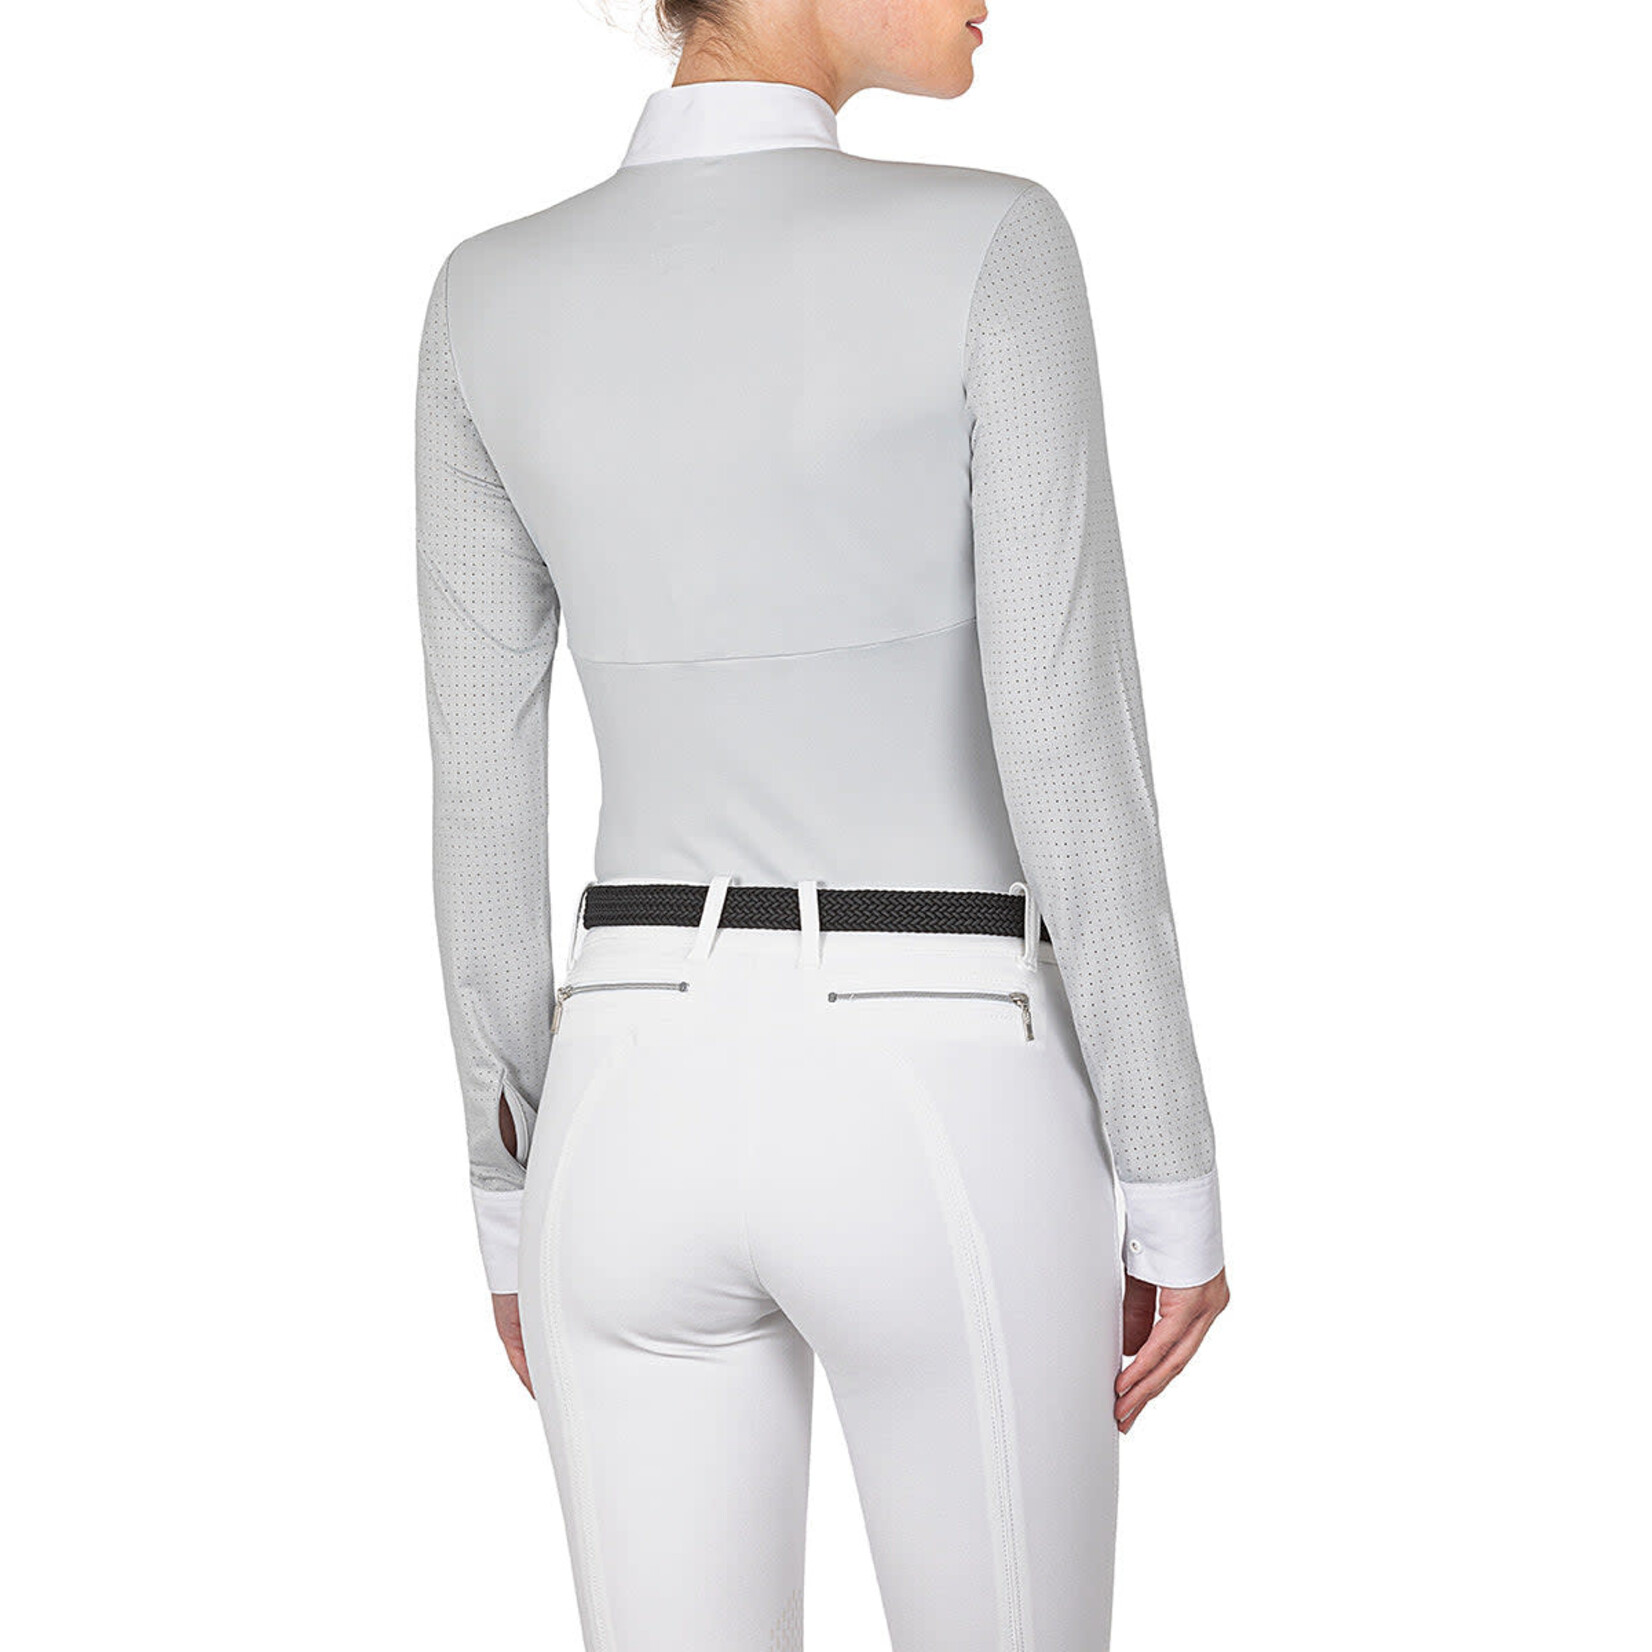 Equiline Equiline Charmianc Women's Perforated Long Sleeve Show Shirt